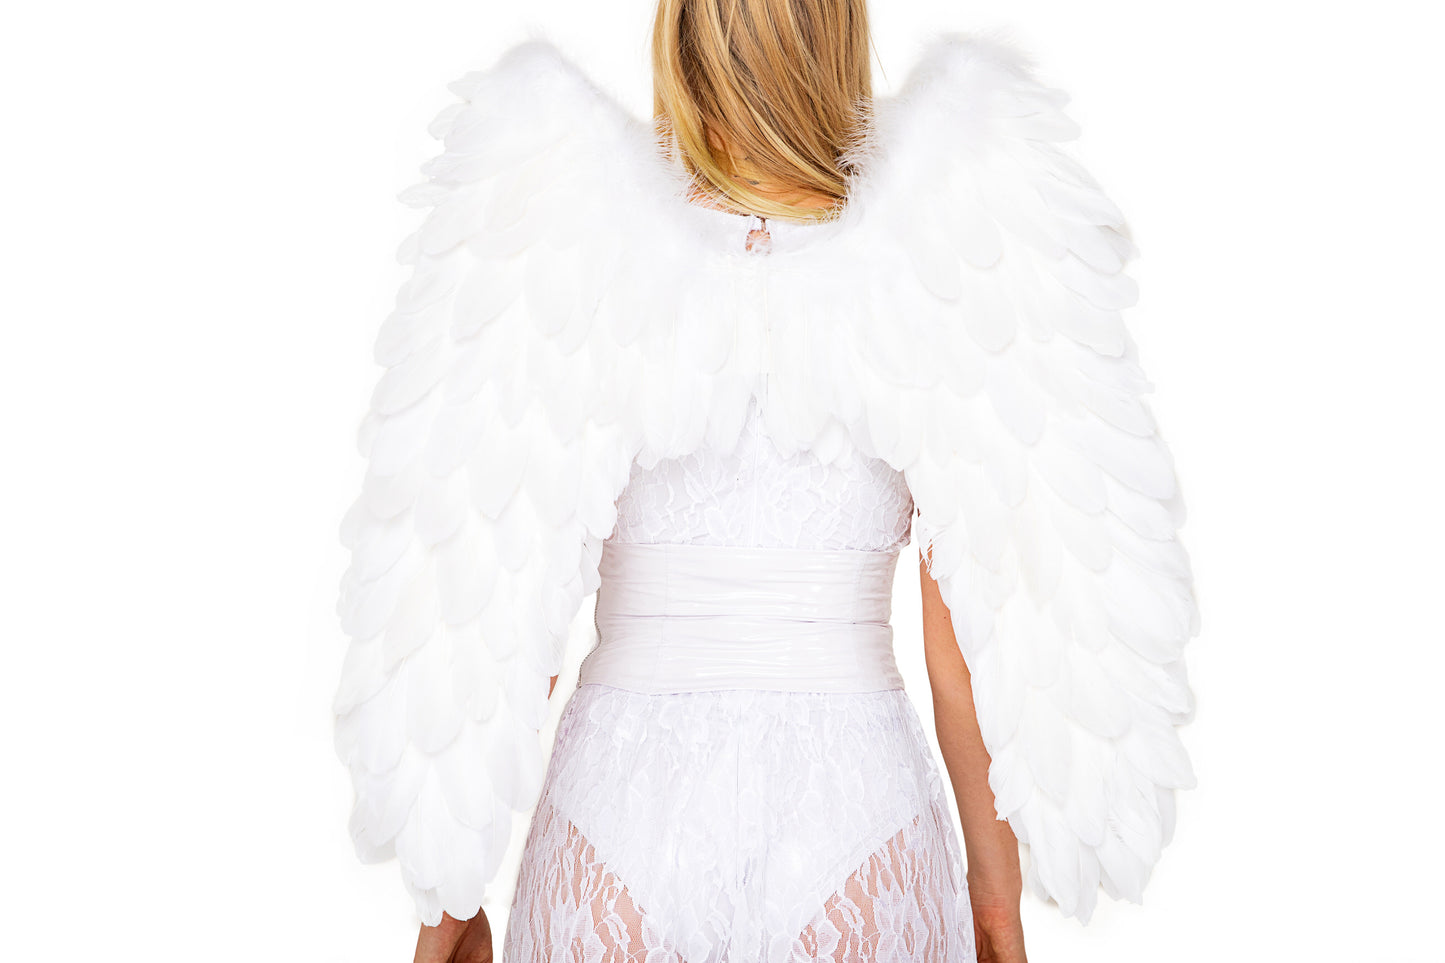 Heavenly Kiss Angel Costume by ROMA in Size S, M, or L